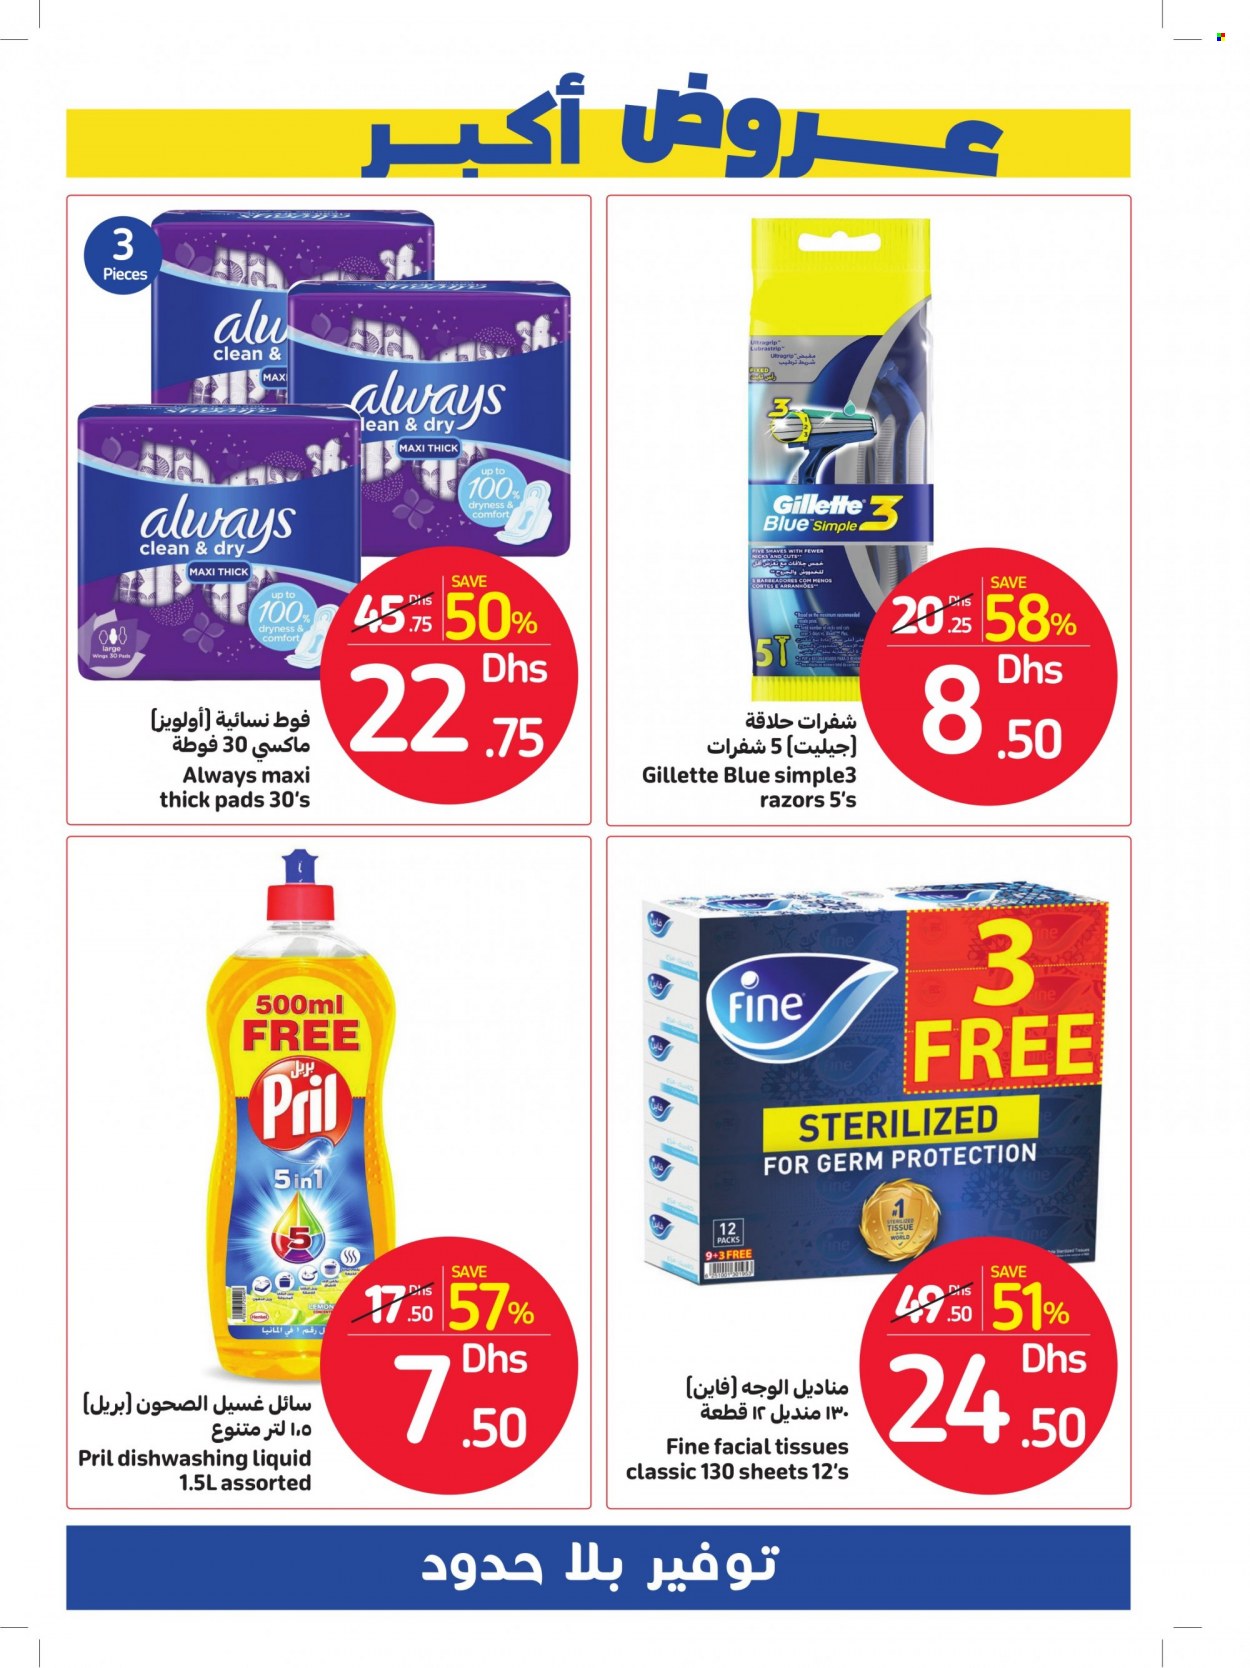 Carrefour offer - 09/08/2022 - 14/08/2022.